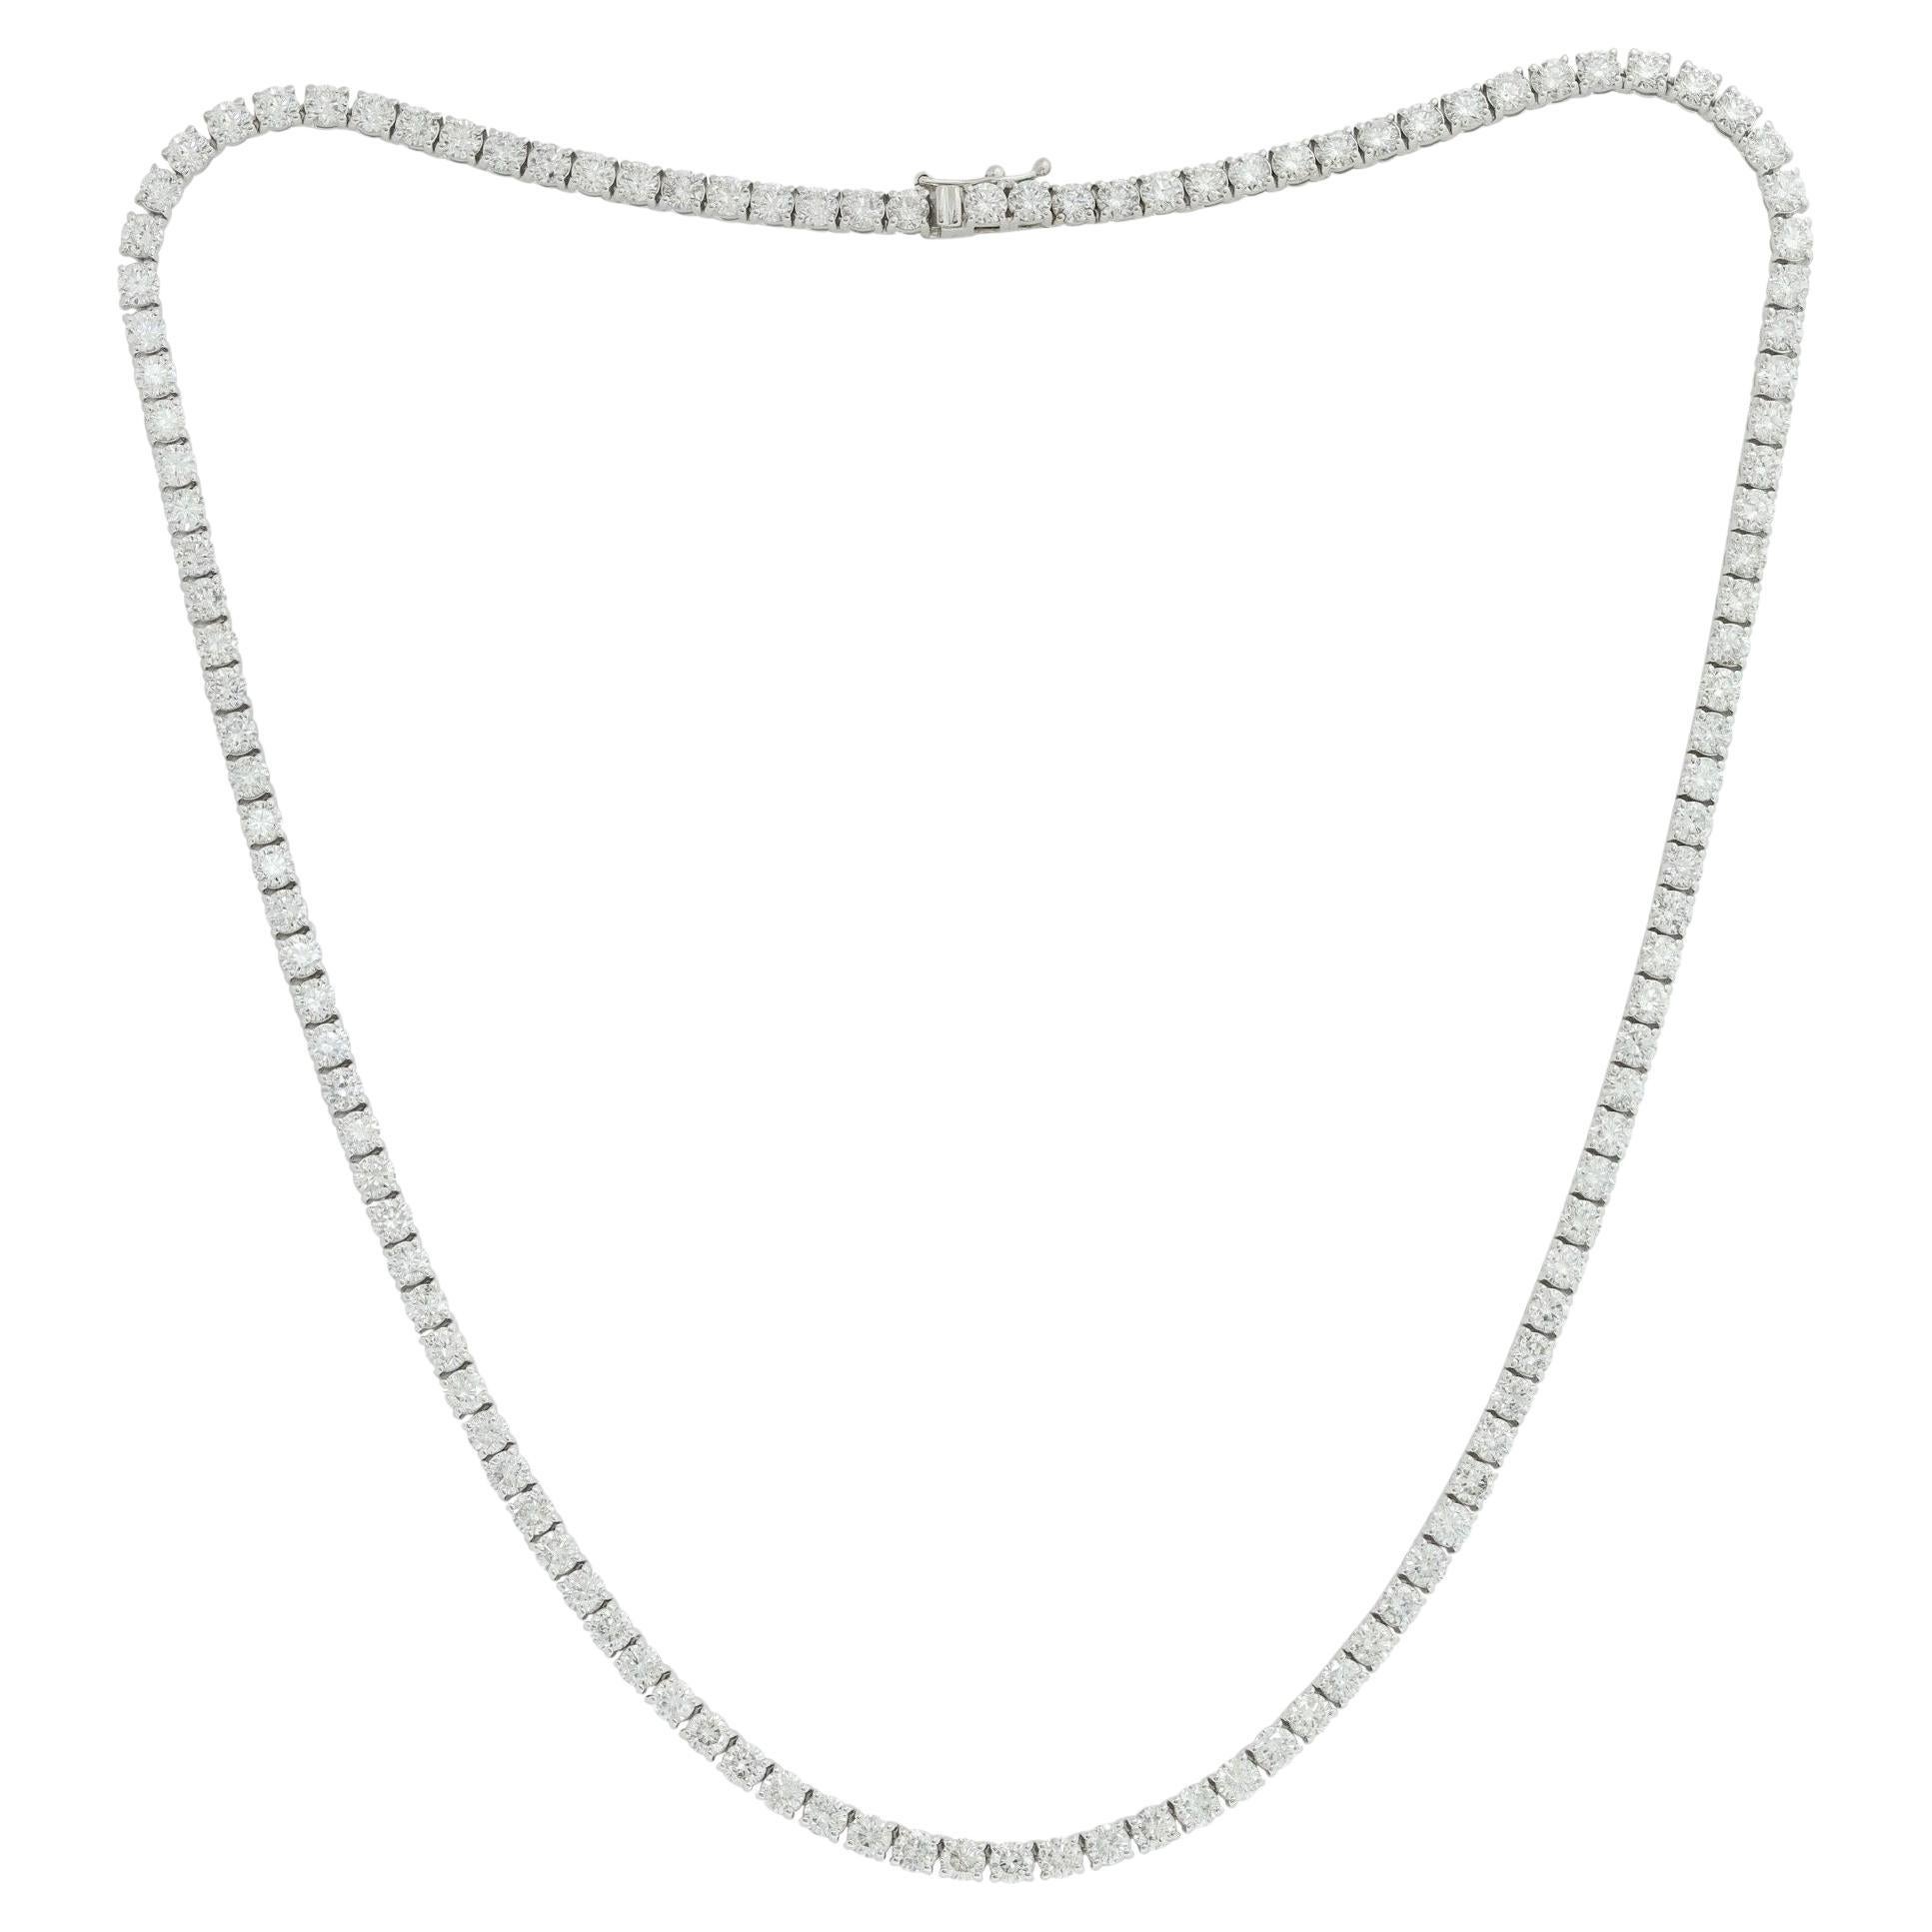 Diana M. 14.42 Cts 4 Prong Diamond 14k White Gold 16.5" Diamond Tennis Necklace For Sale